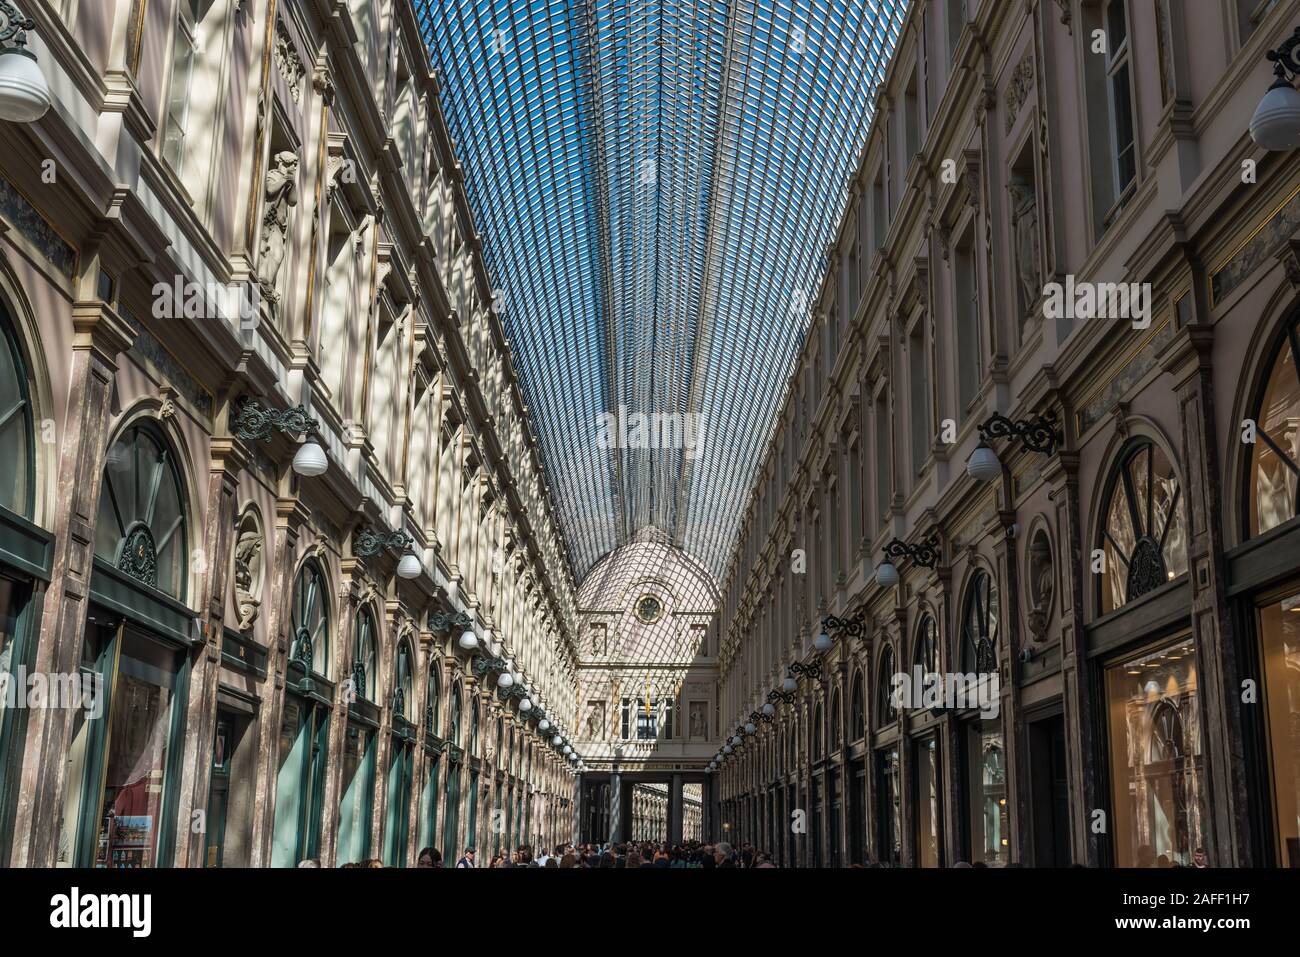 Brussels Old Town, Brussels Capital Region / Belgium - 09 14 2019: The glass art nouveau ceiling of the Galeries Royales Saint-Hubert, the Saint-Huber Stock Photo